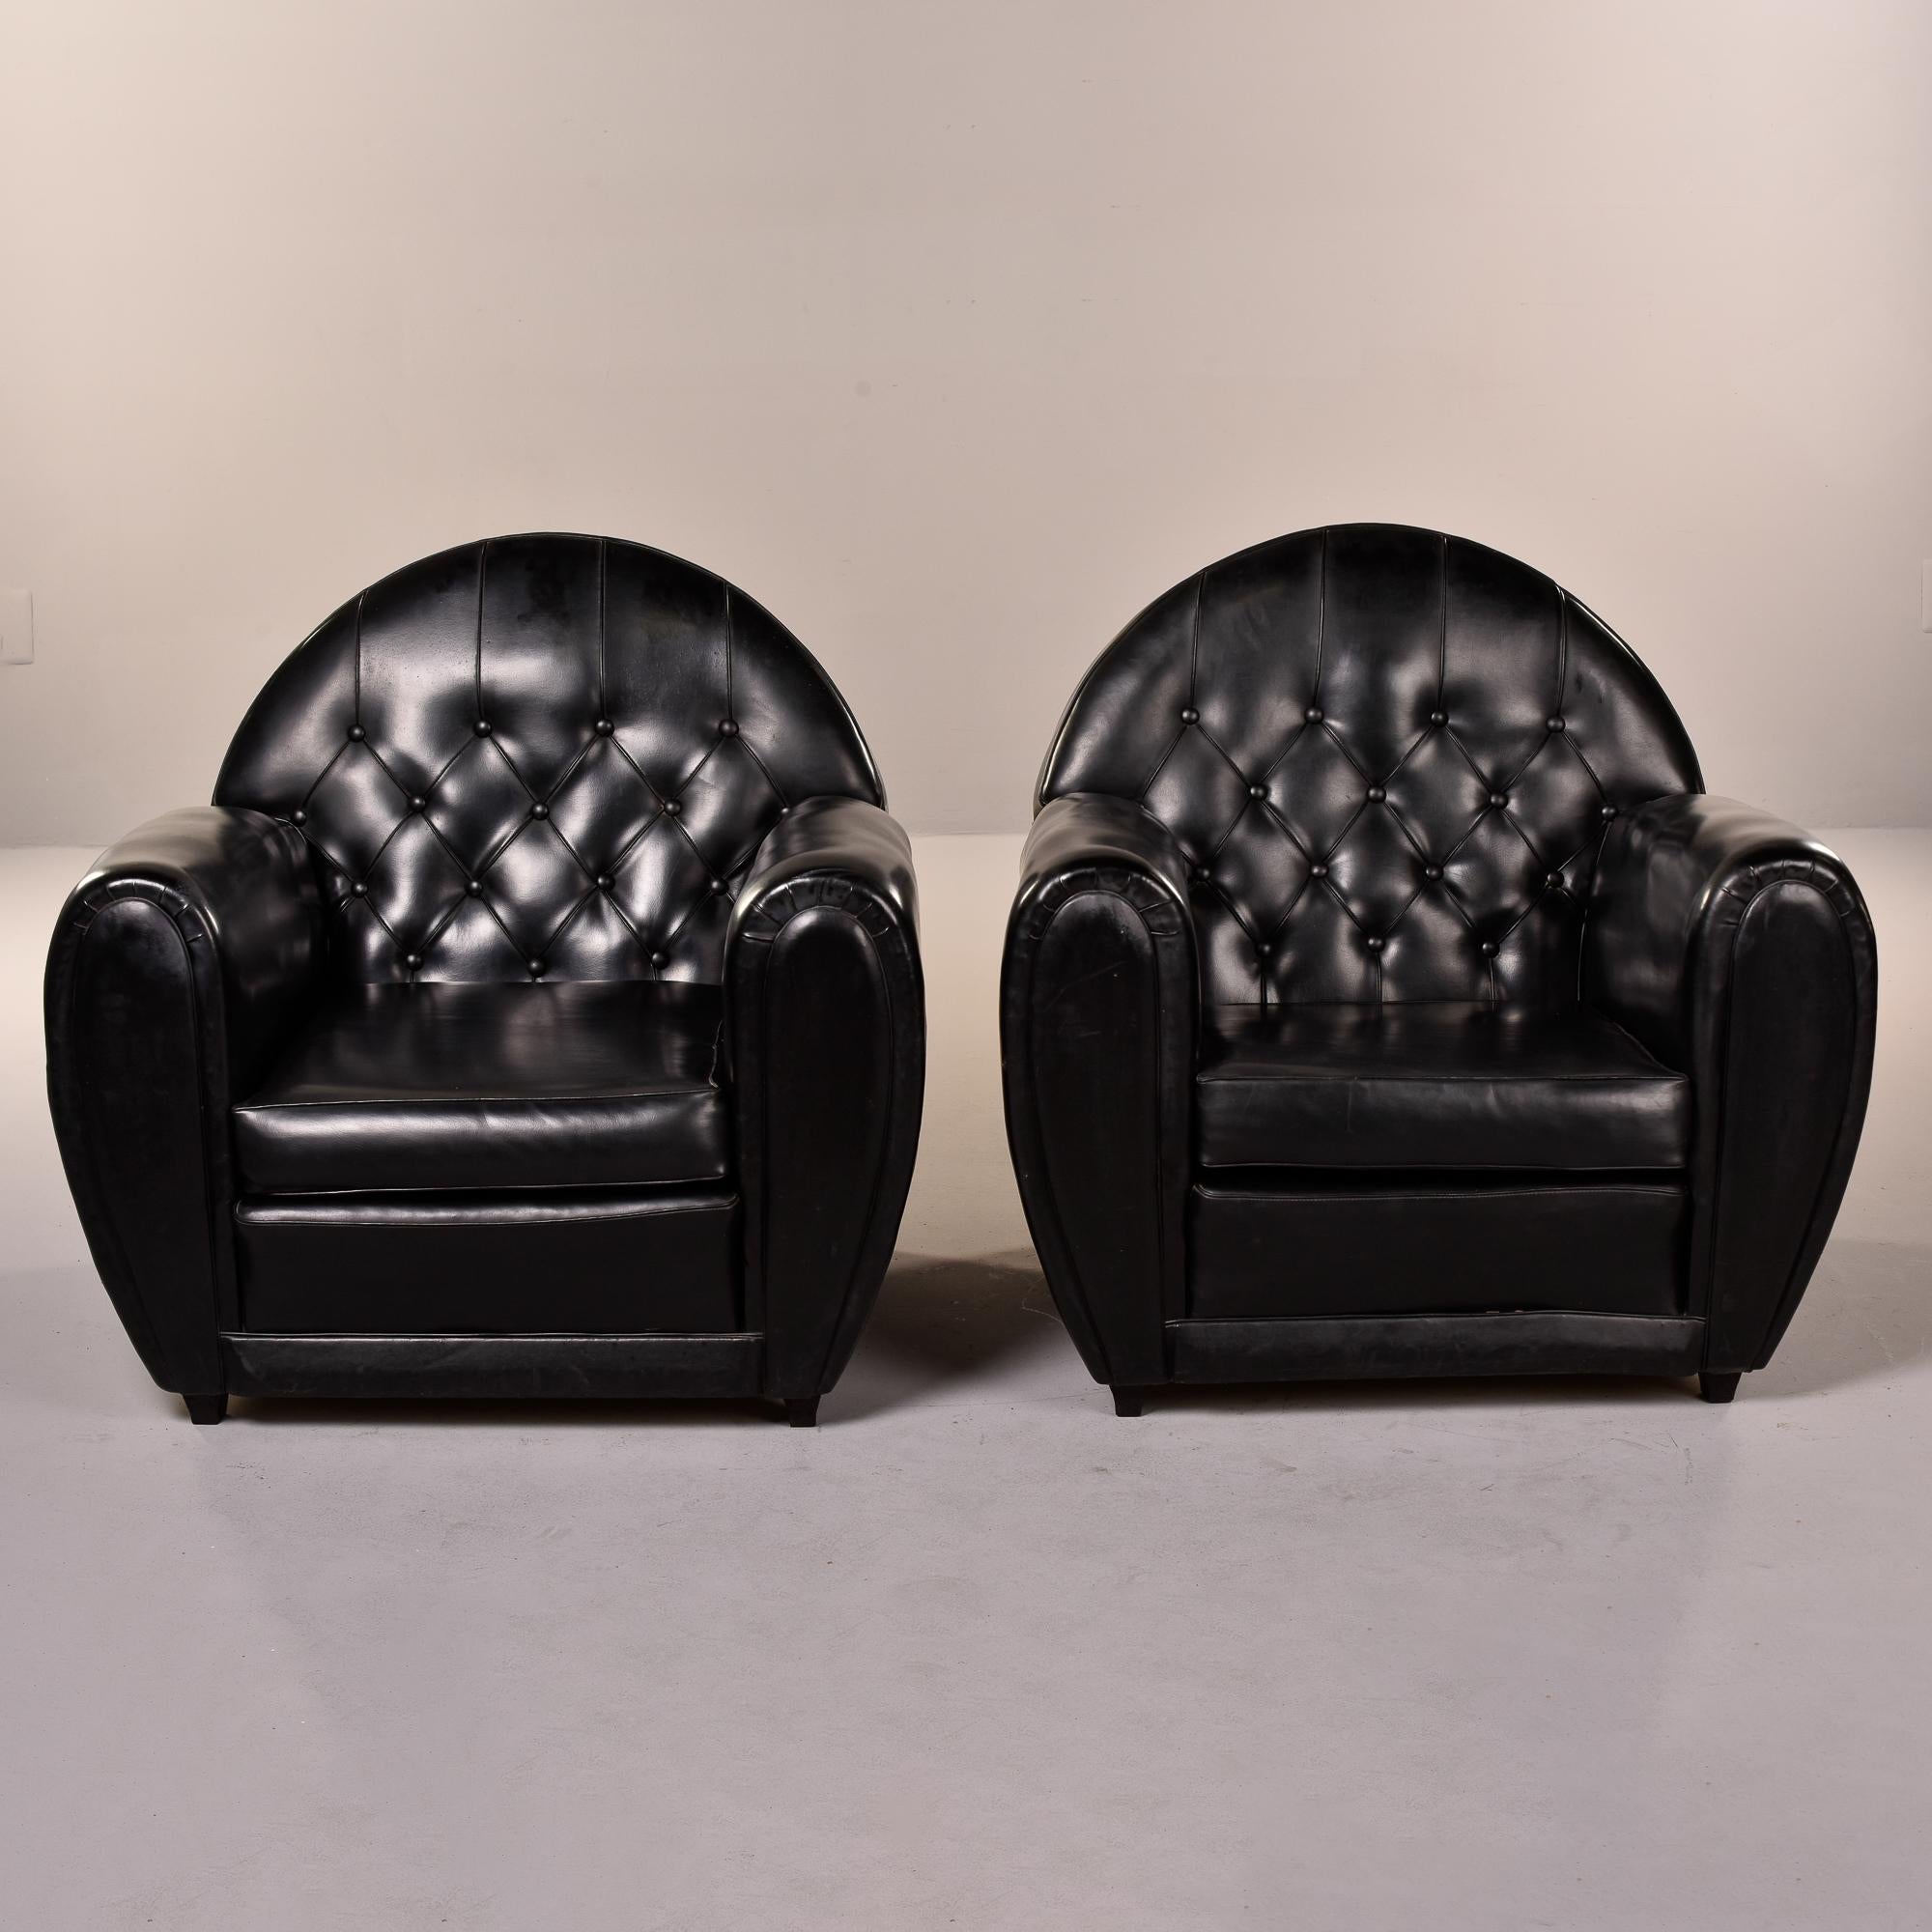 Pair of circa 1940s French club chairs in black leather. Chairs have button-tufted rounded backs, curved arms, and removable seat cushions. Very good overall vintage condition with original leather showing some scattered wear. Unknown maker. Sold